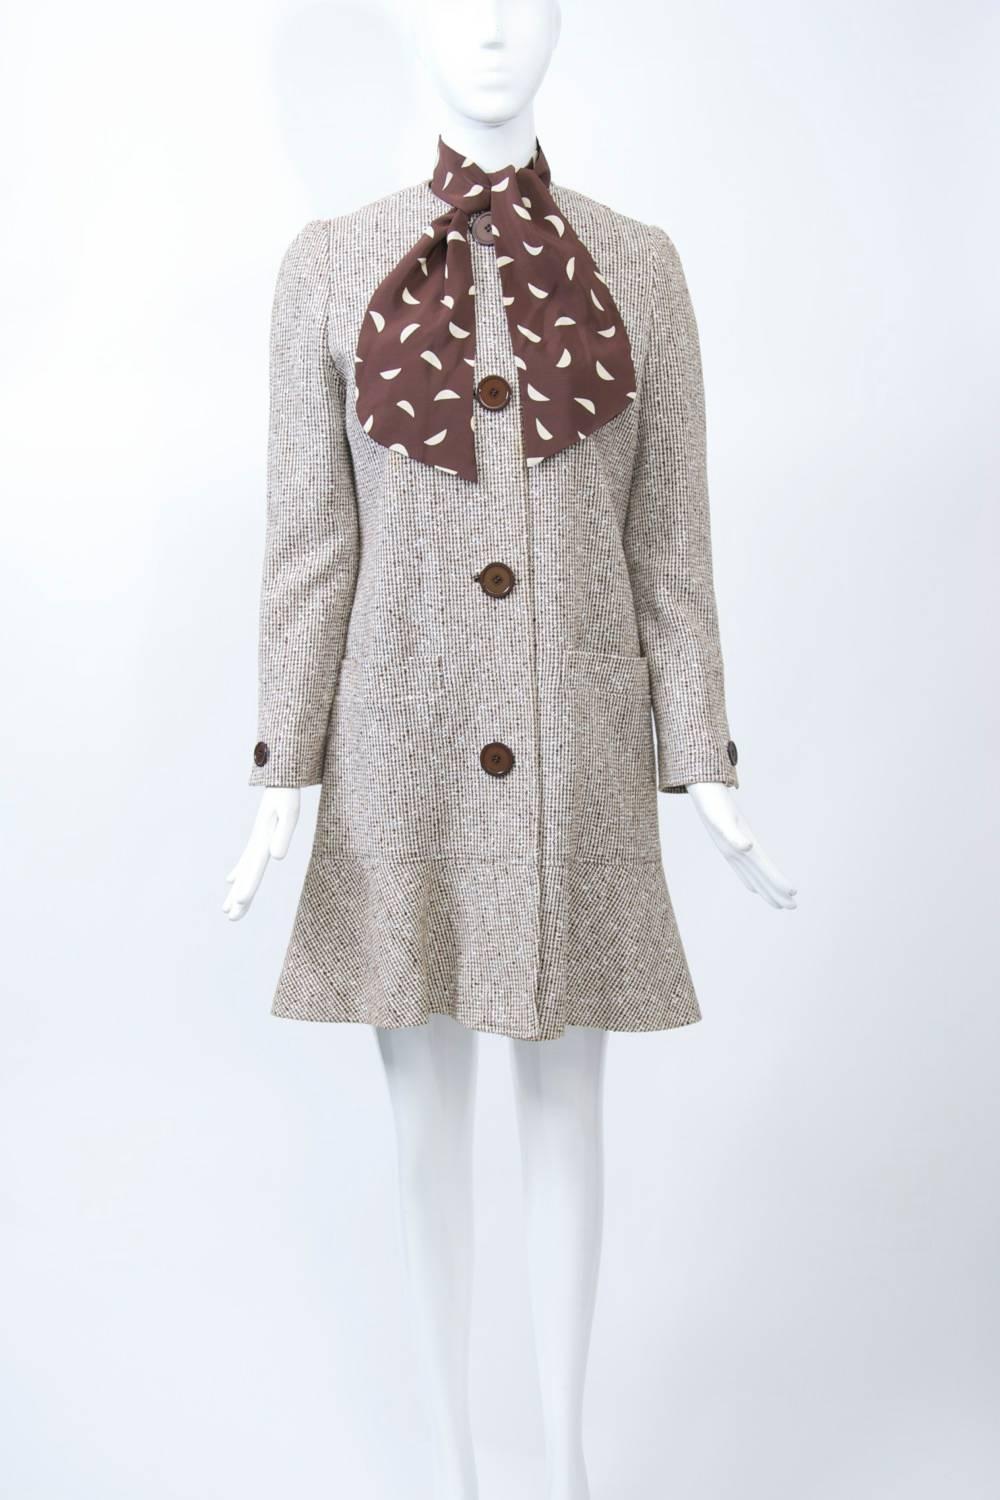 Coat and dress ensemble by David Hayes, a Los Angeles designer known for his timeless ensembles and dresses and who counted among his famous clients Nancy Reagan. The coat is fashioned of a brown tweed in a linen or cotton blend and features a deep